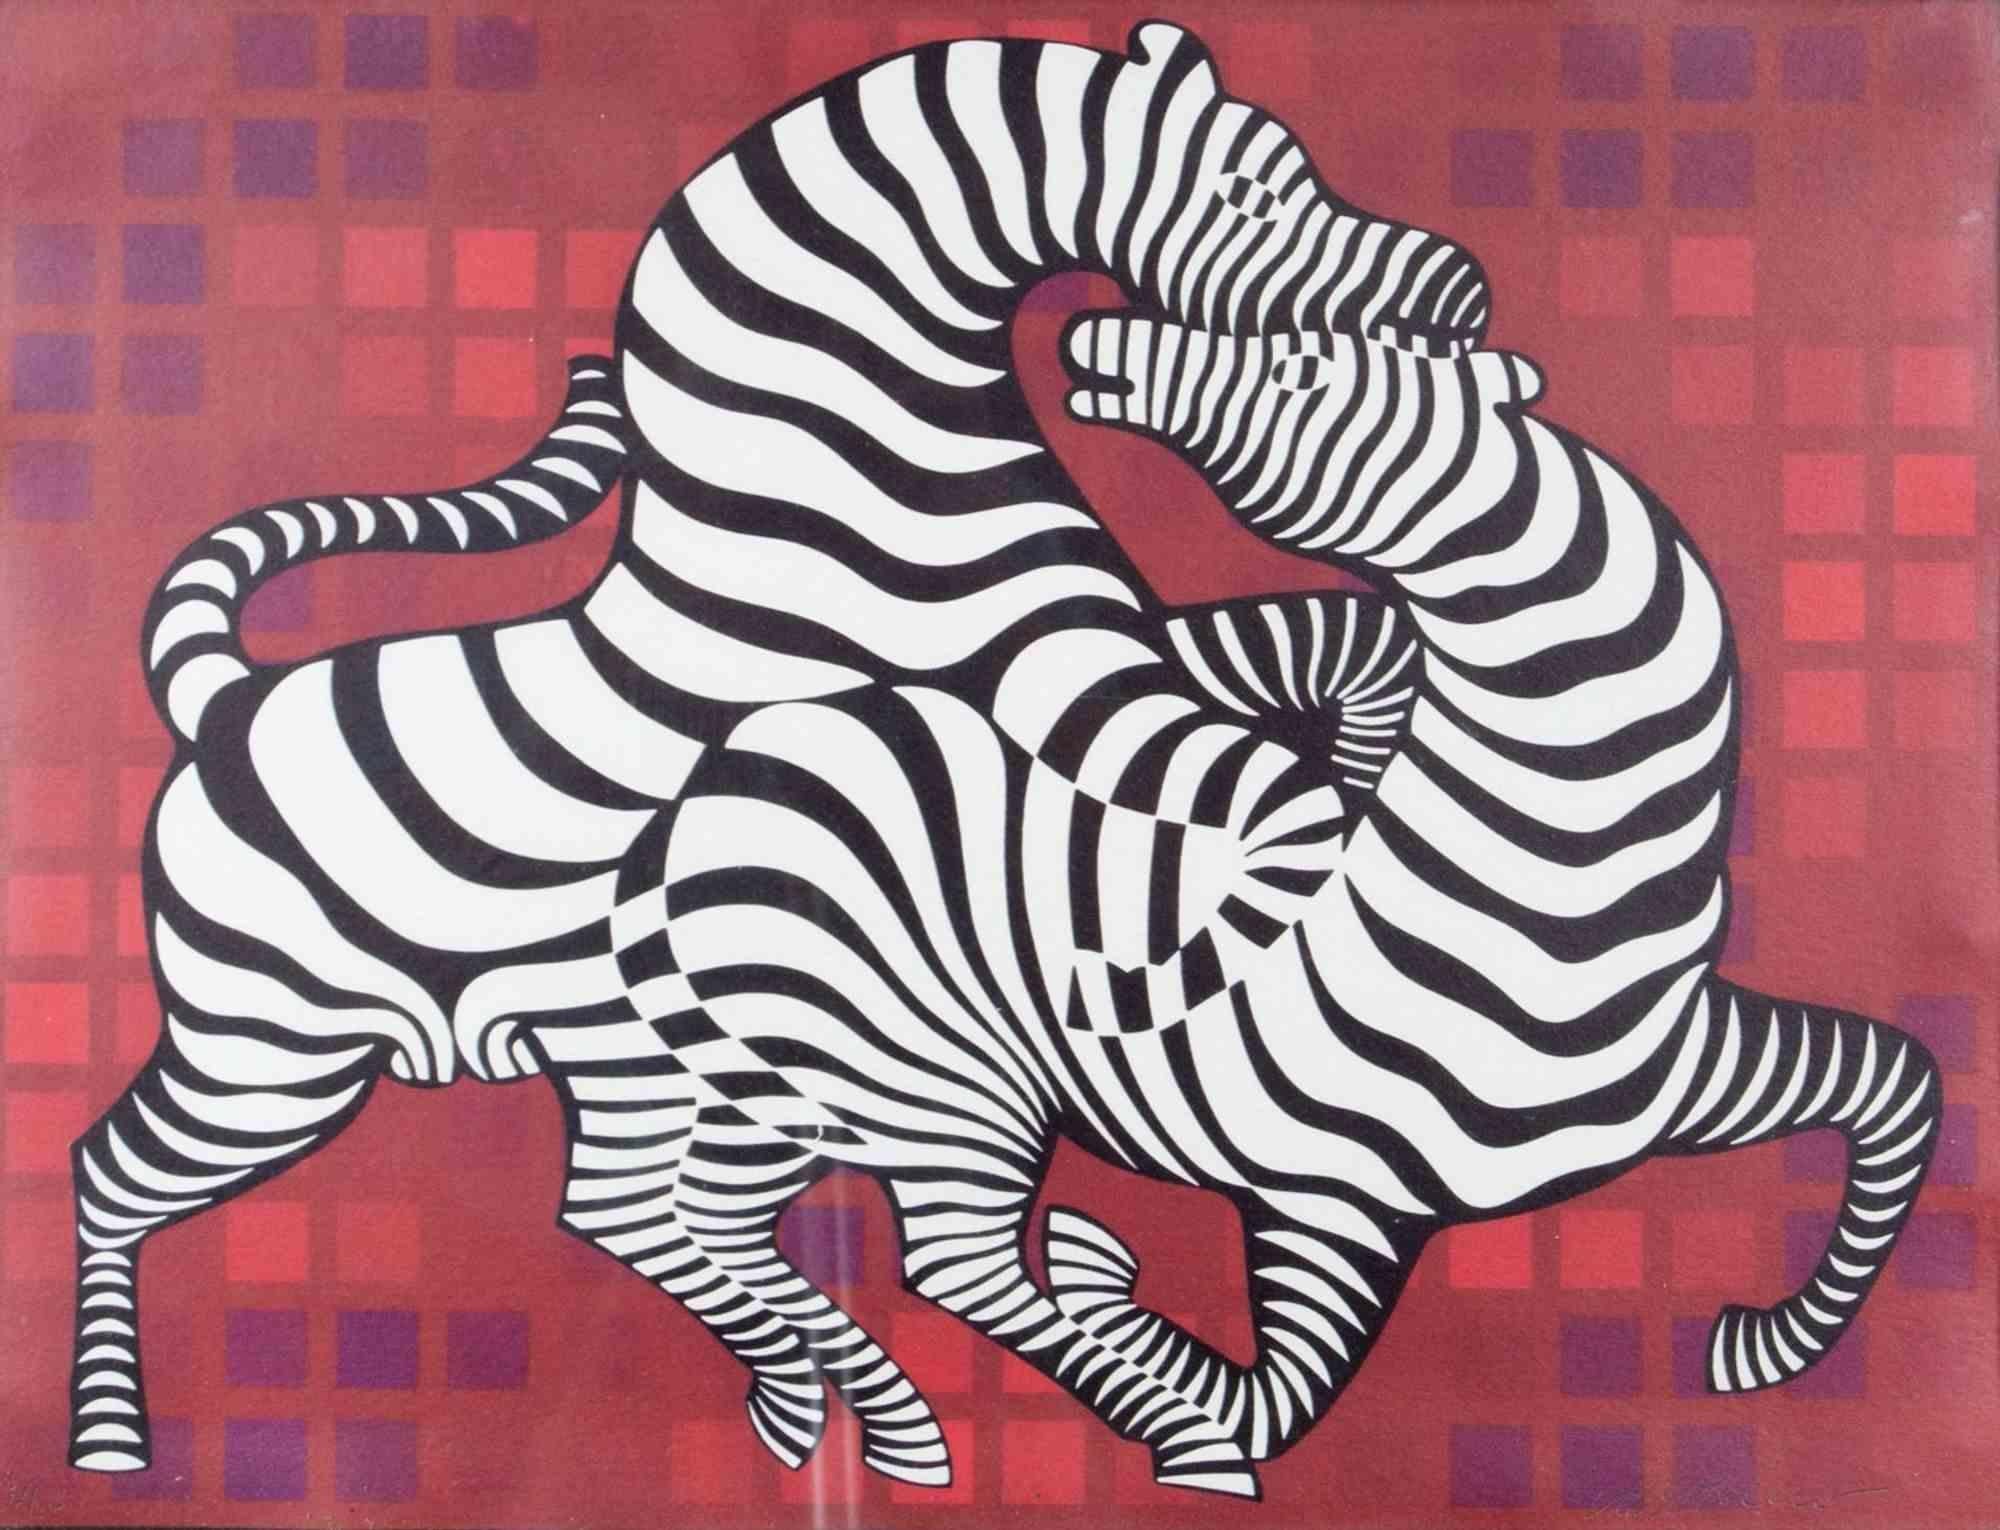 Victor Vasarely Figurative Print - Two Zebras - Screen Print by V. Vasarely - 1987